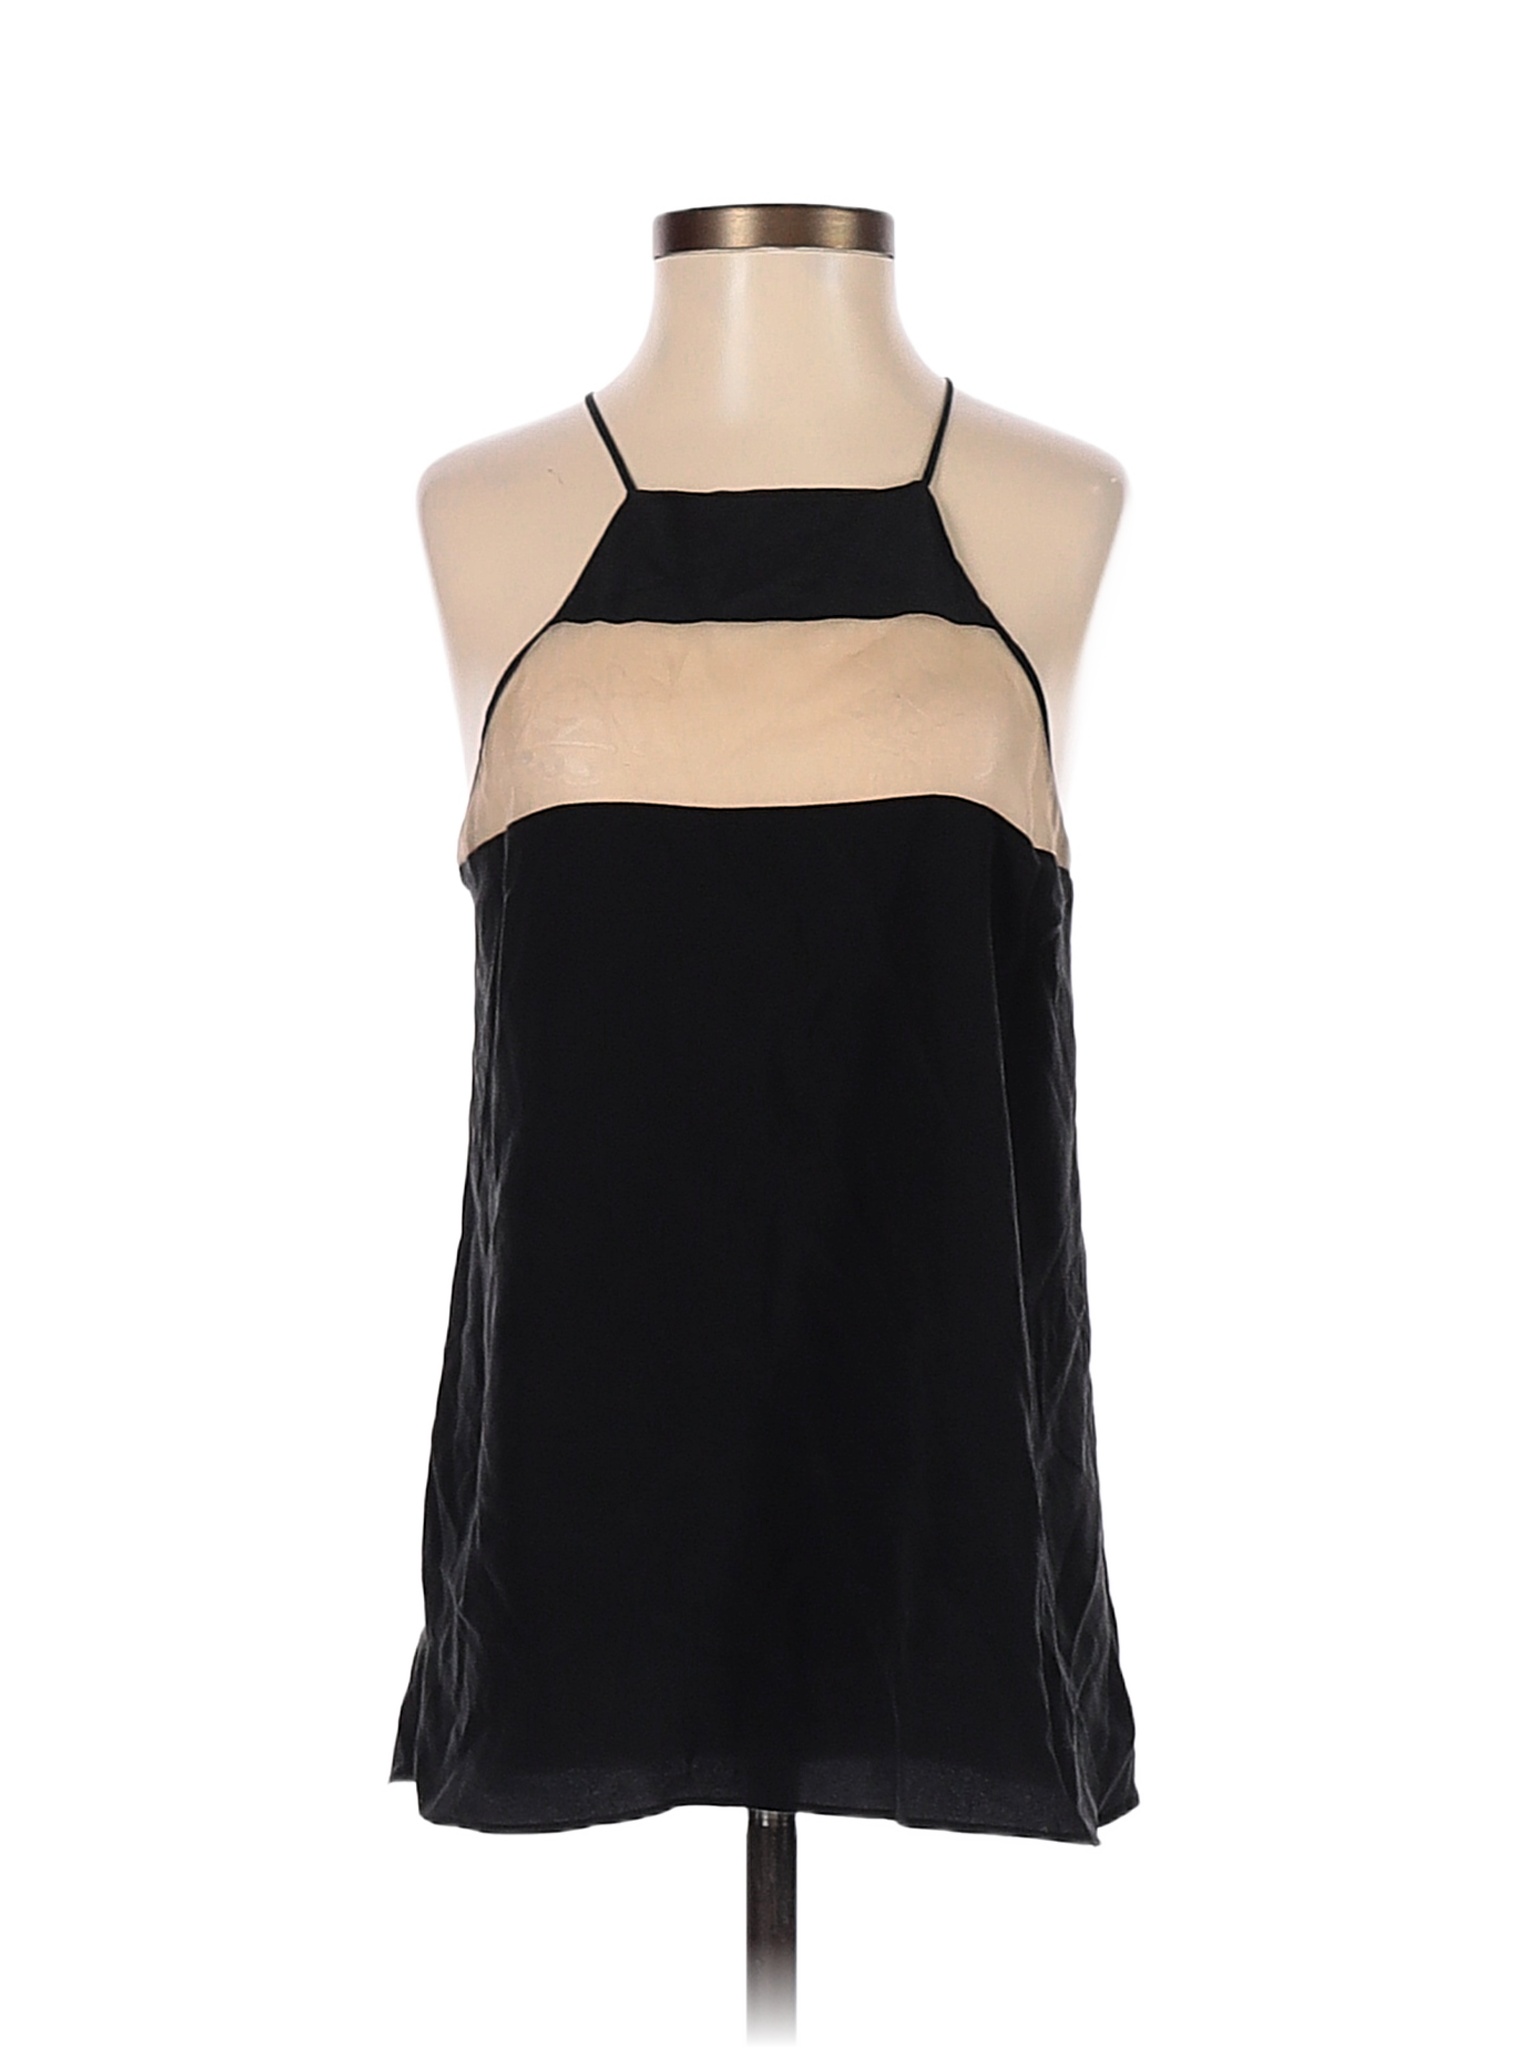 Cami Women's Silk Tops On Sale Up To 90% Off Retail